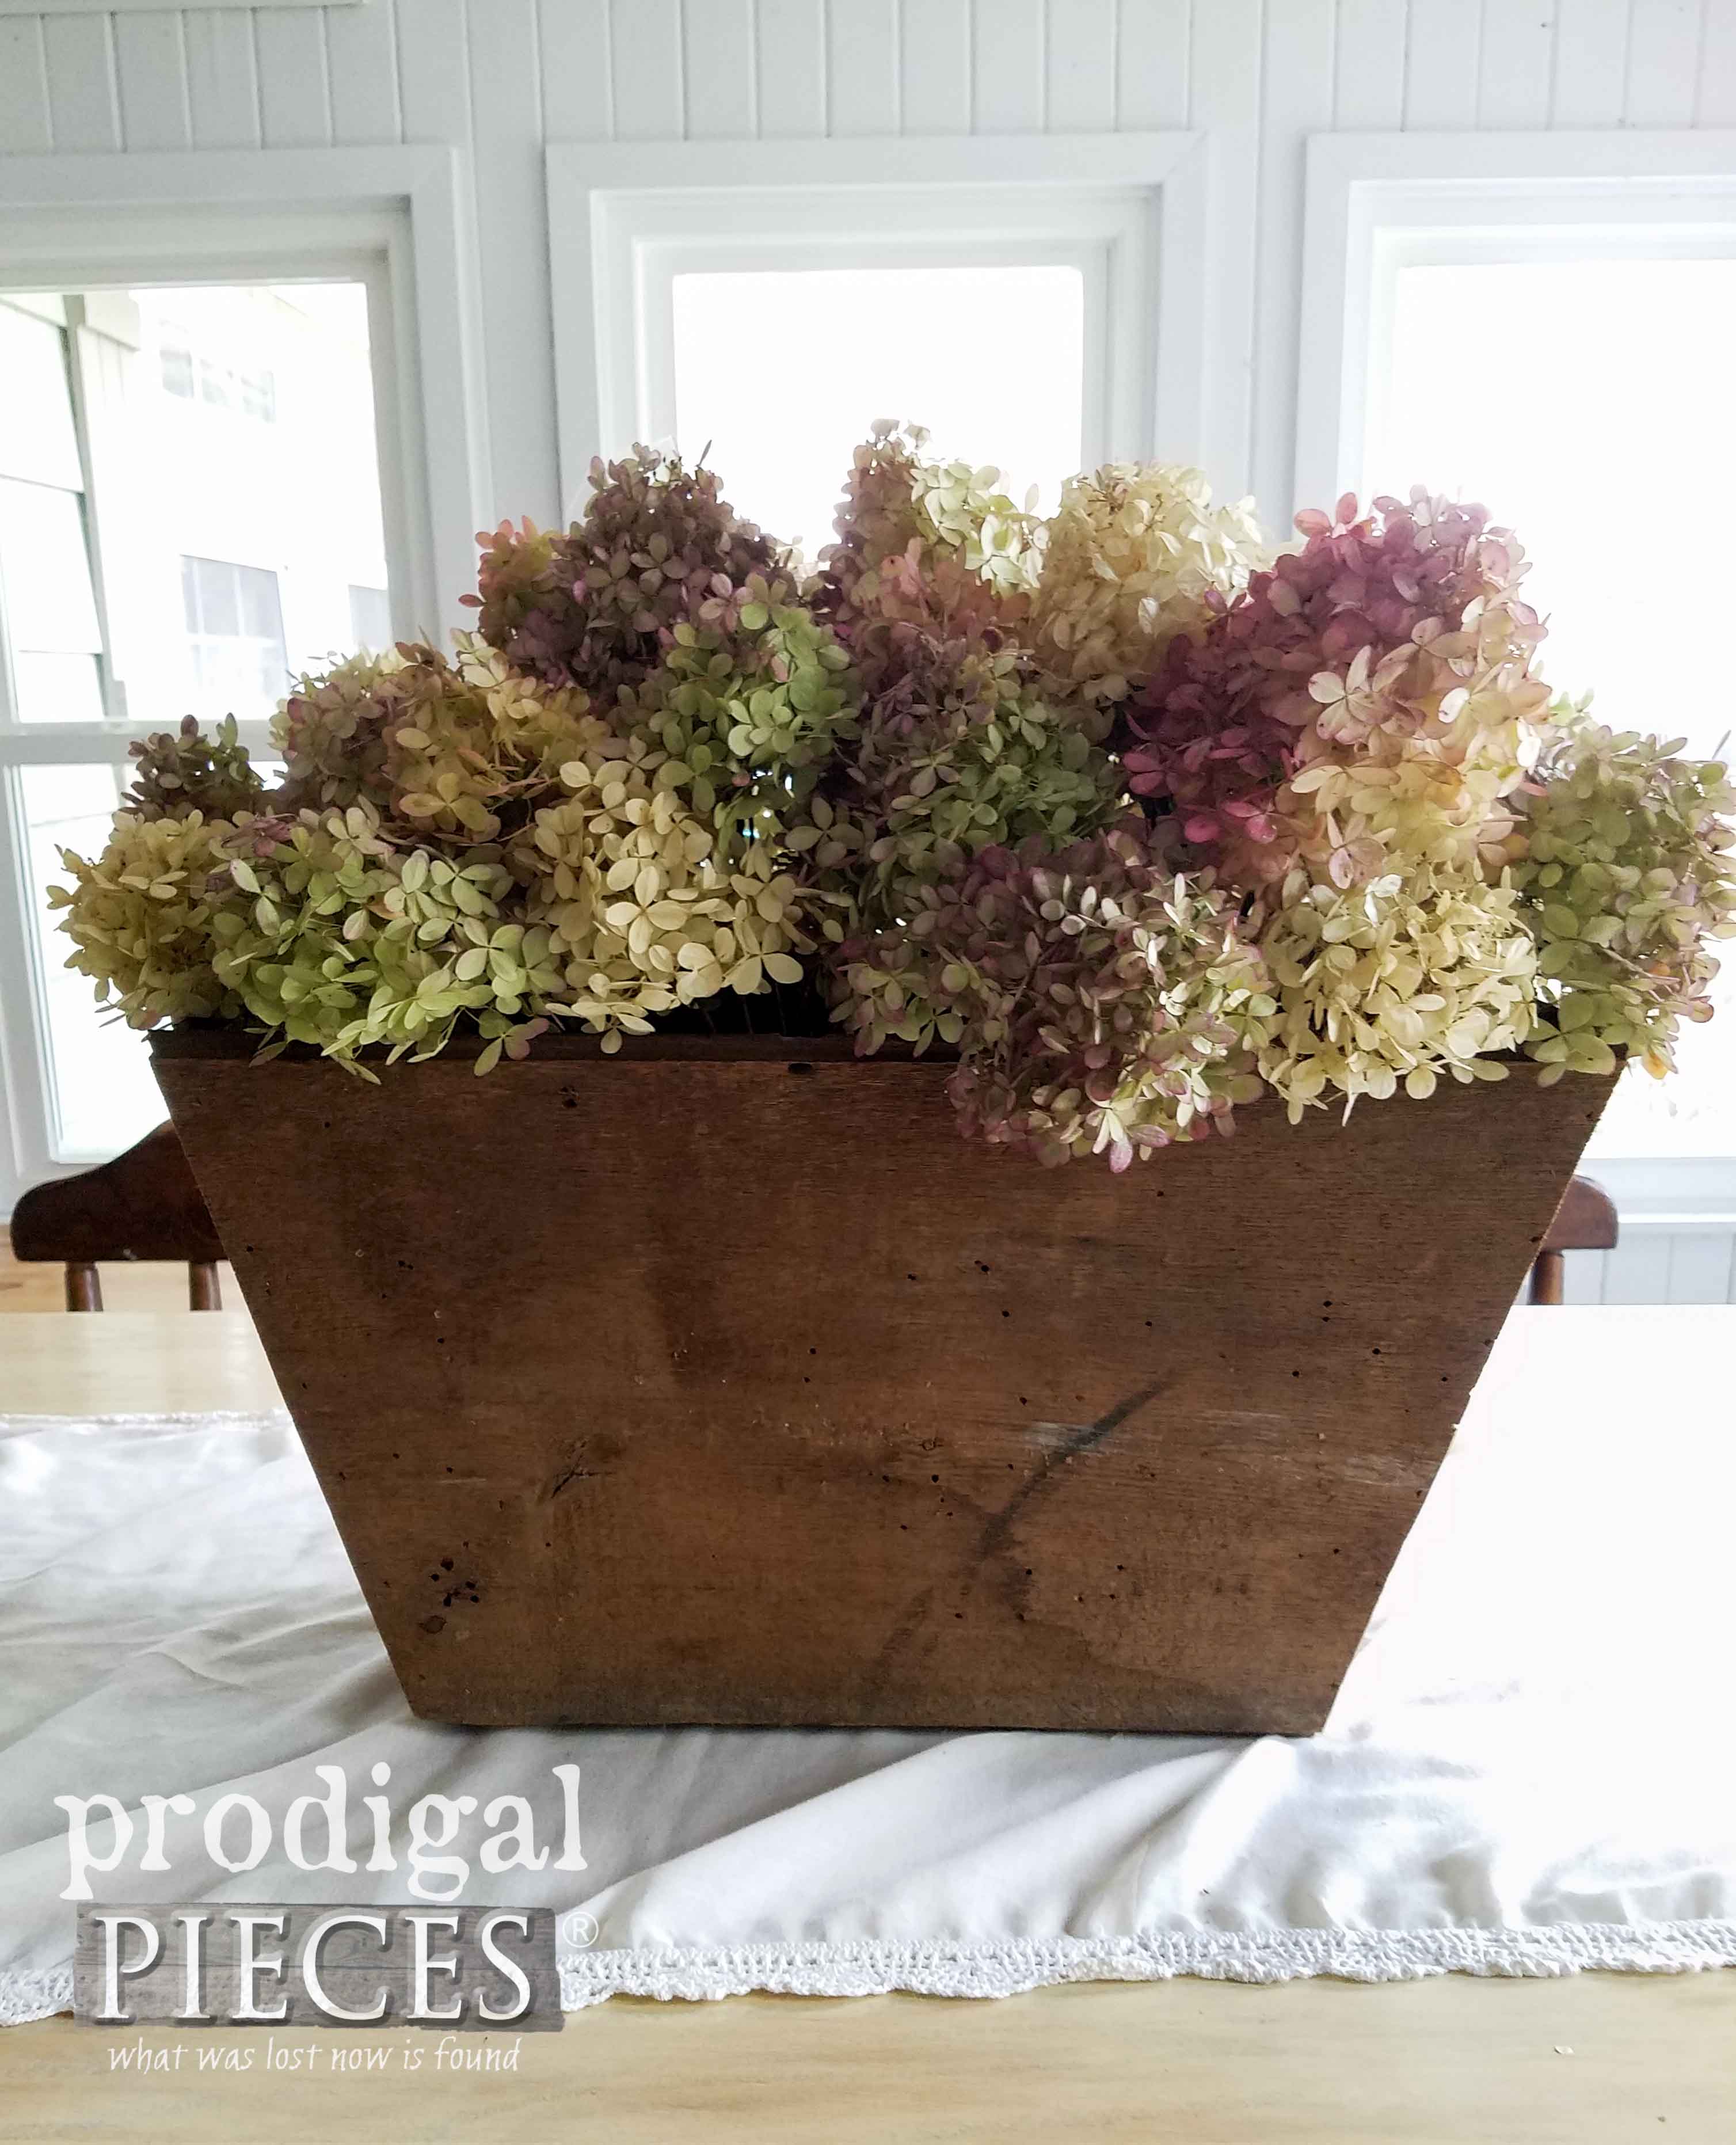 Rustic Barn Wood Planter with Hydrangeas by Prodigal Pieces | prodigalpieces.com